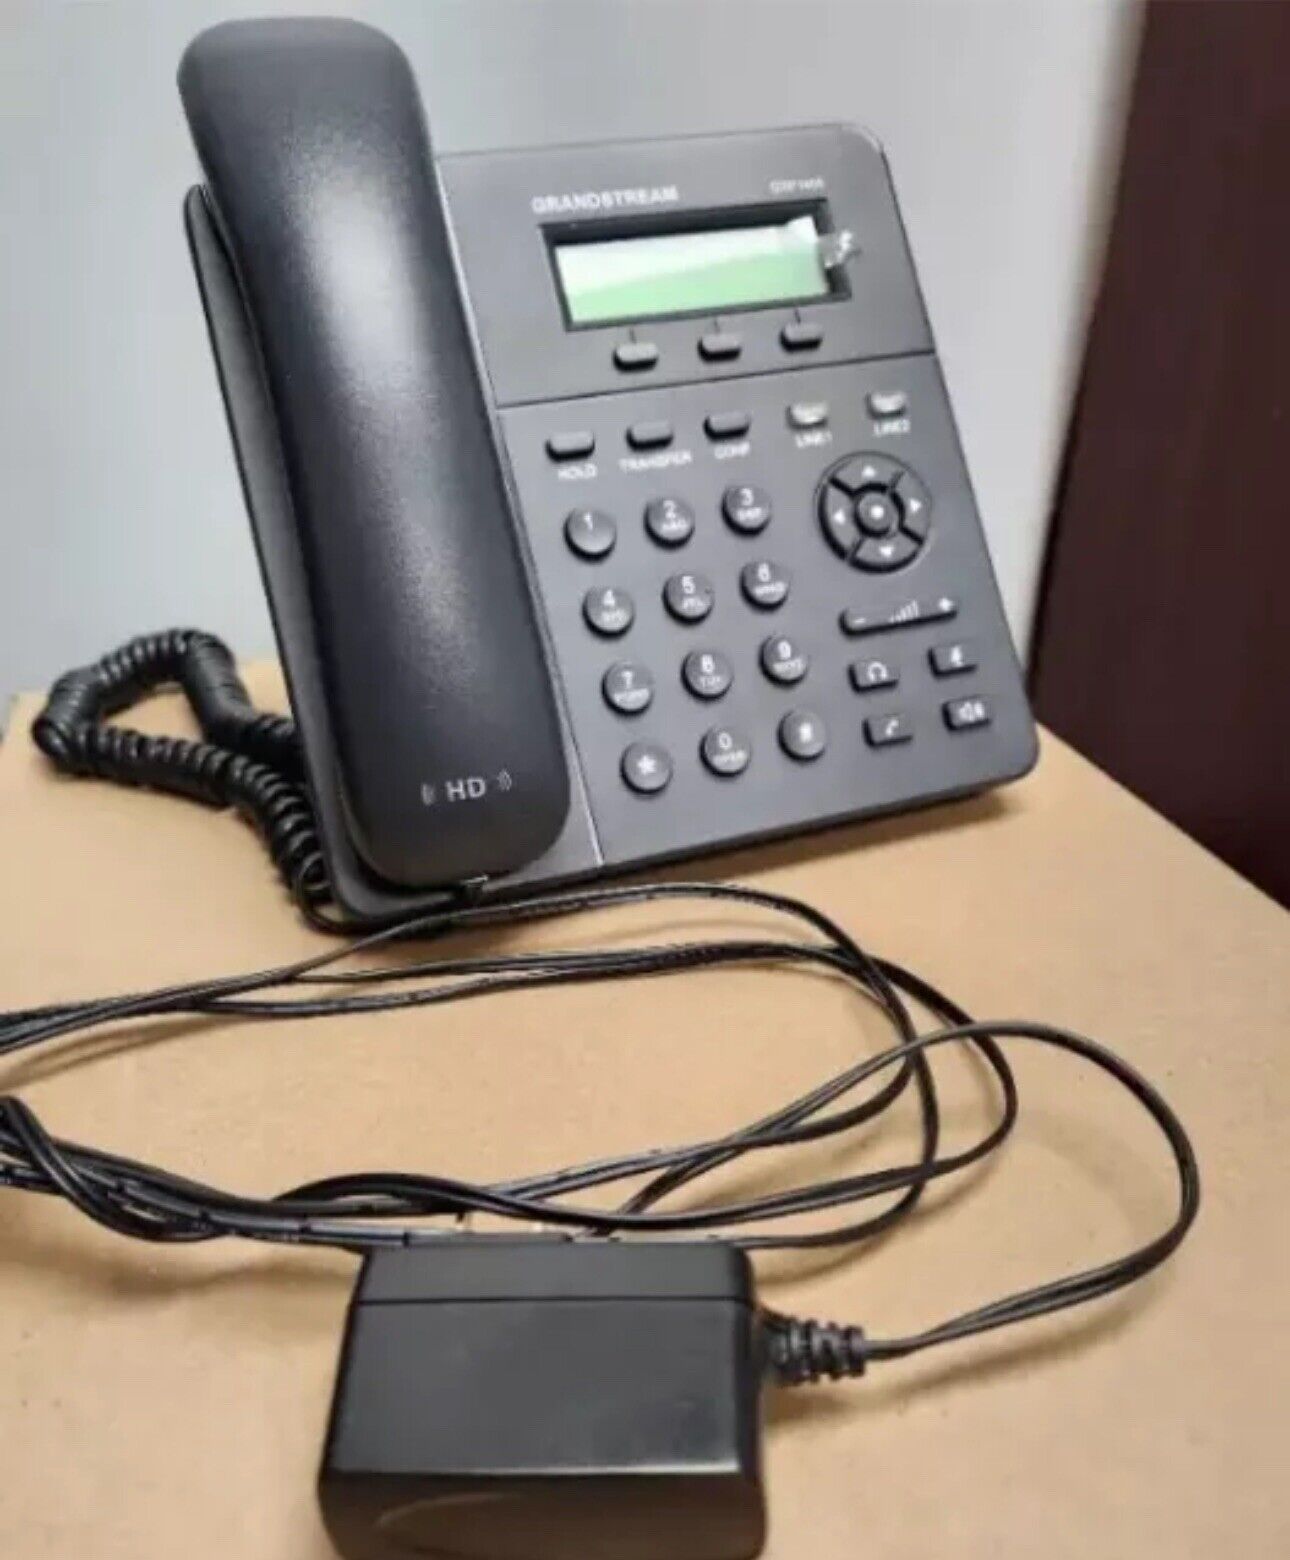 VoIP Phone Grandstream 1405 - Business Phone - Tested And Working Used